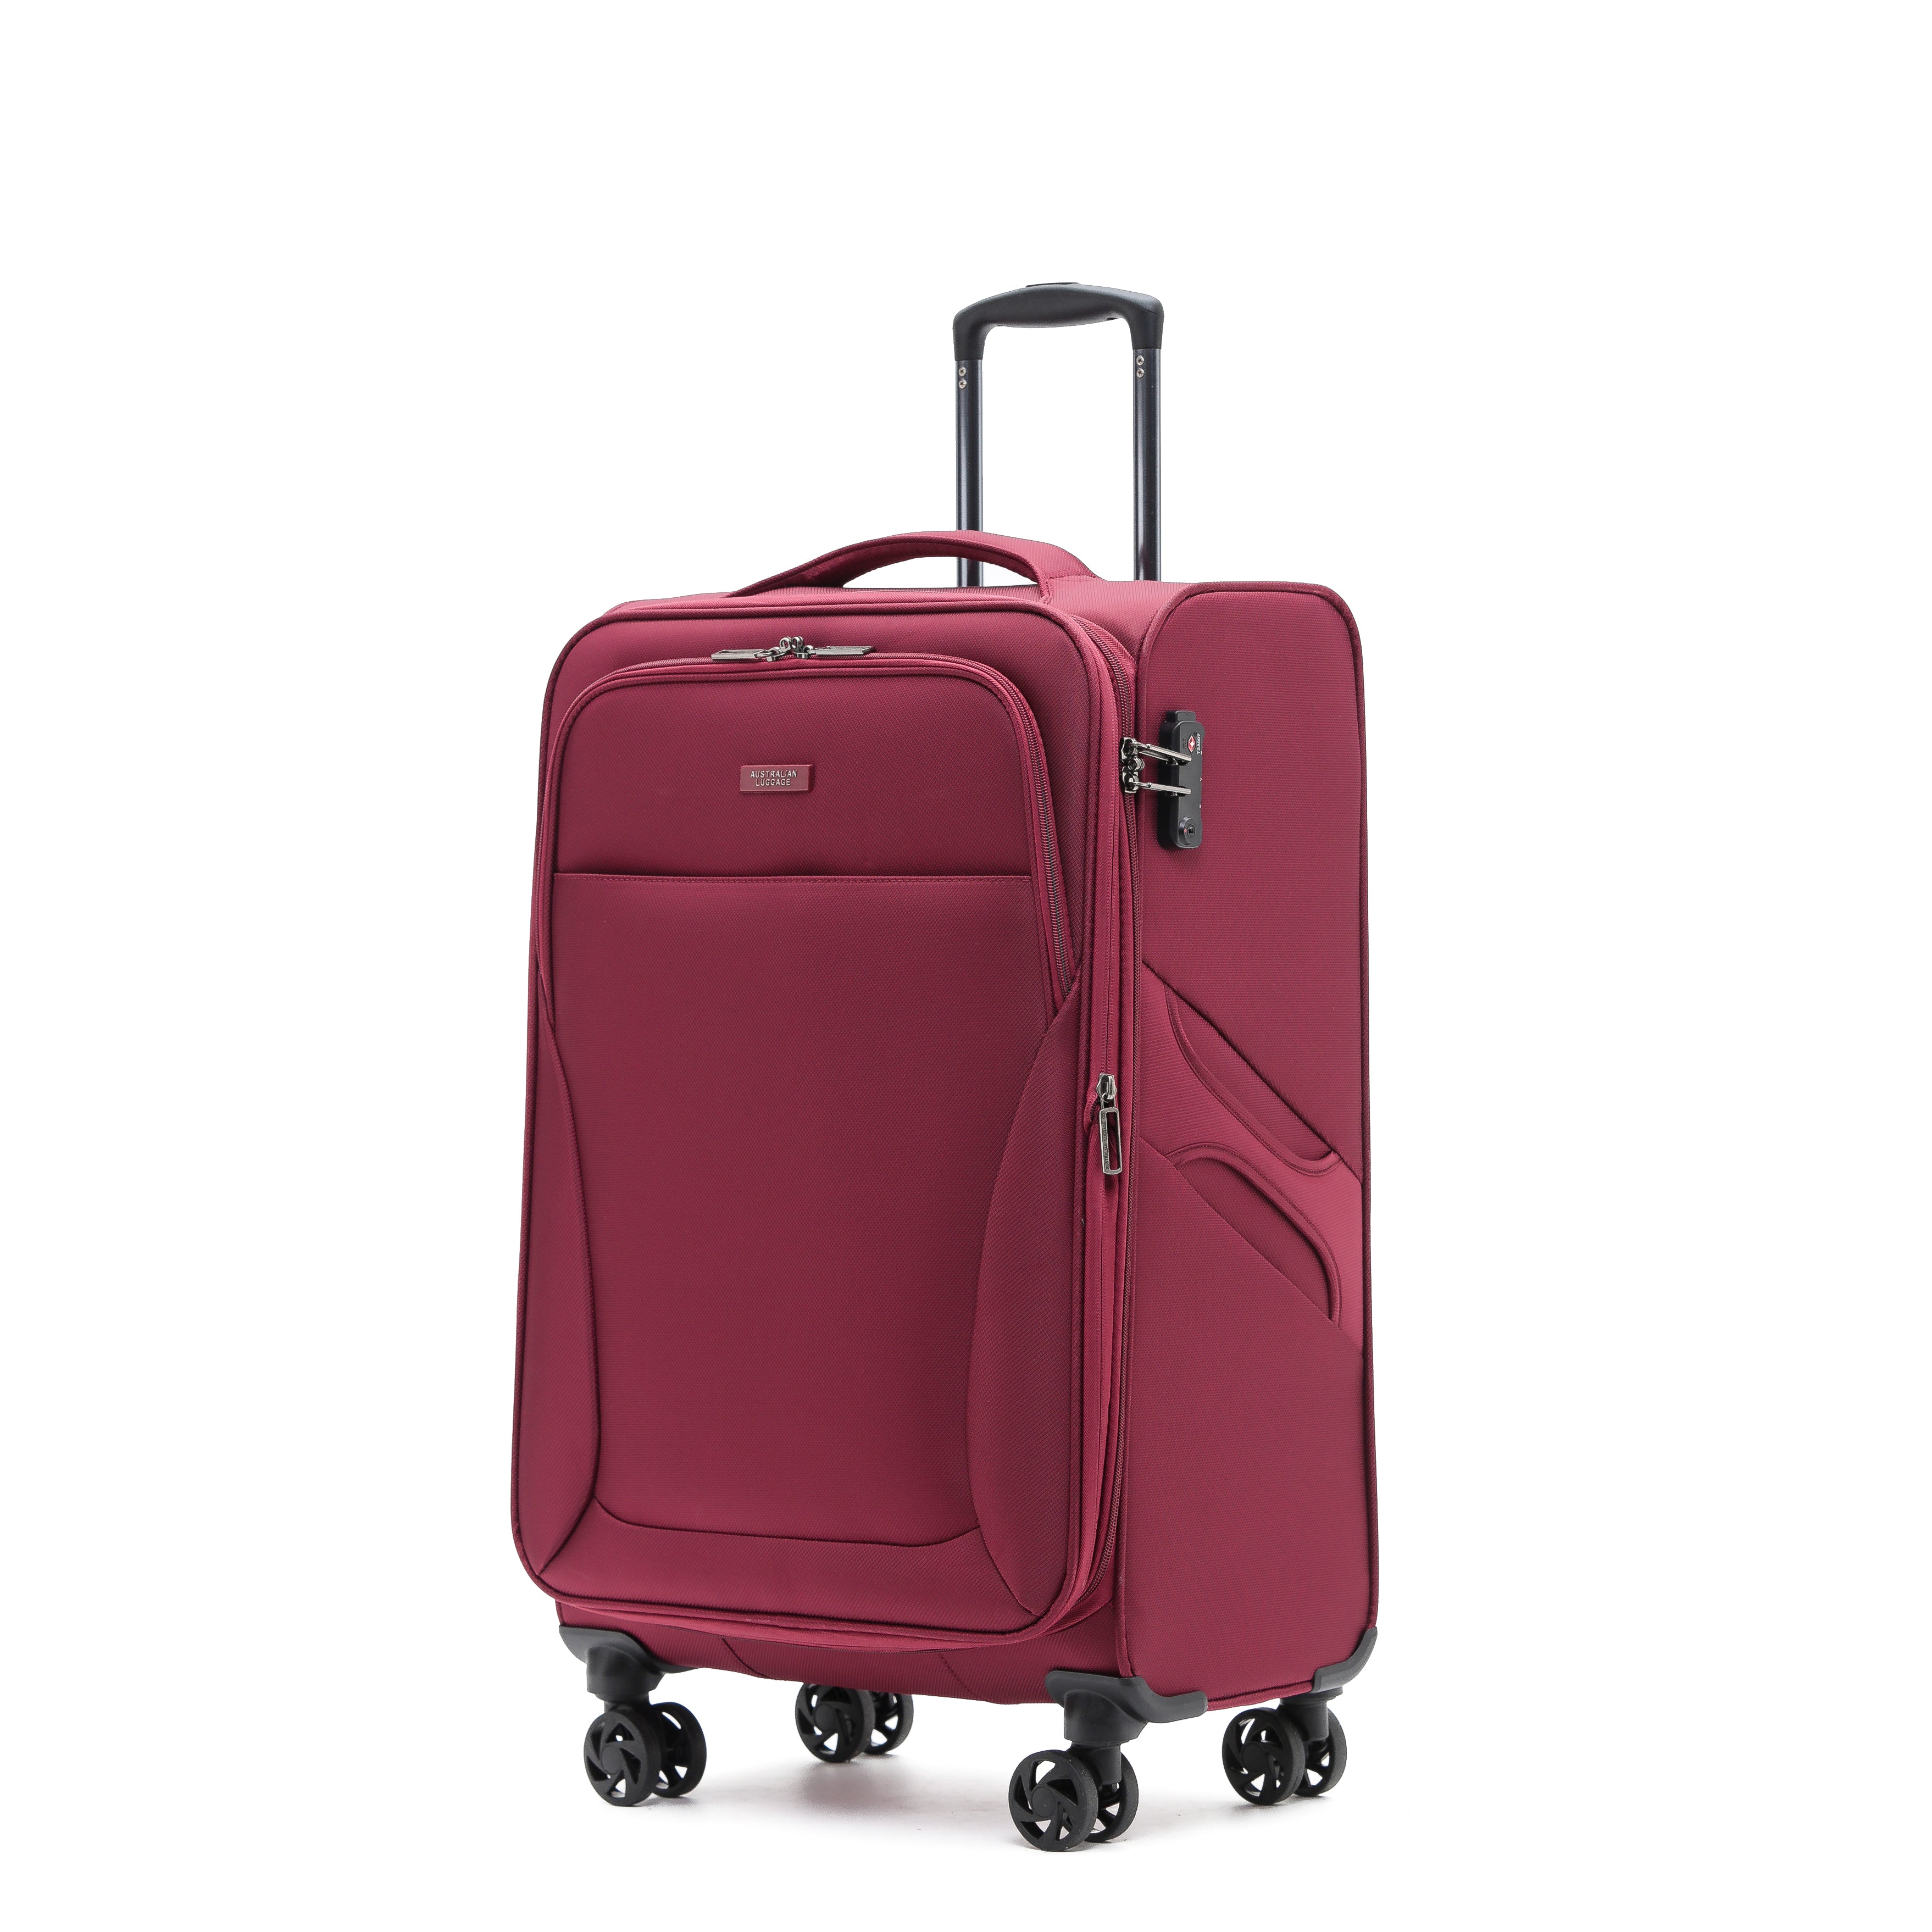 Aus Luggage - WINGS Set of 3 Suitcases - Wine-7